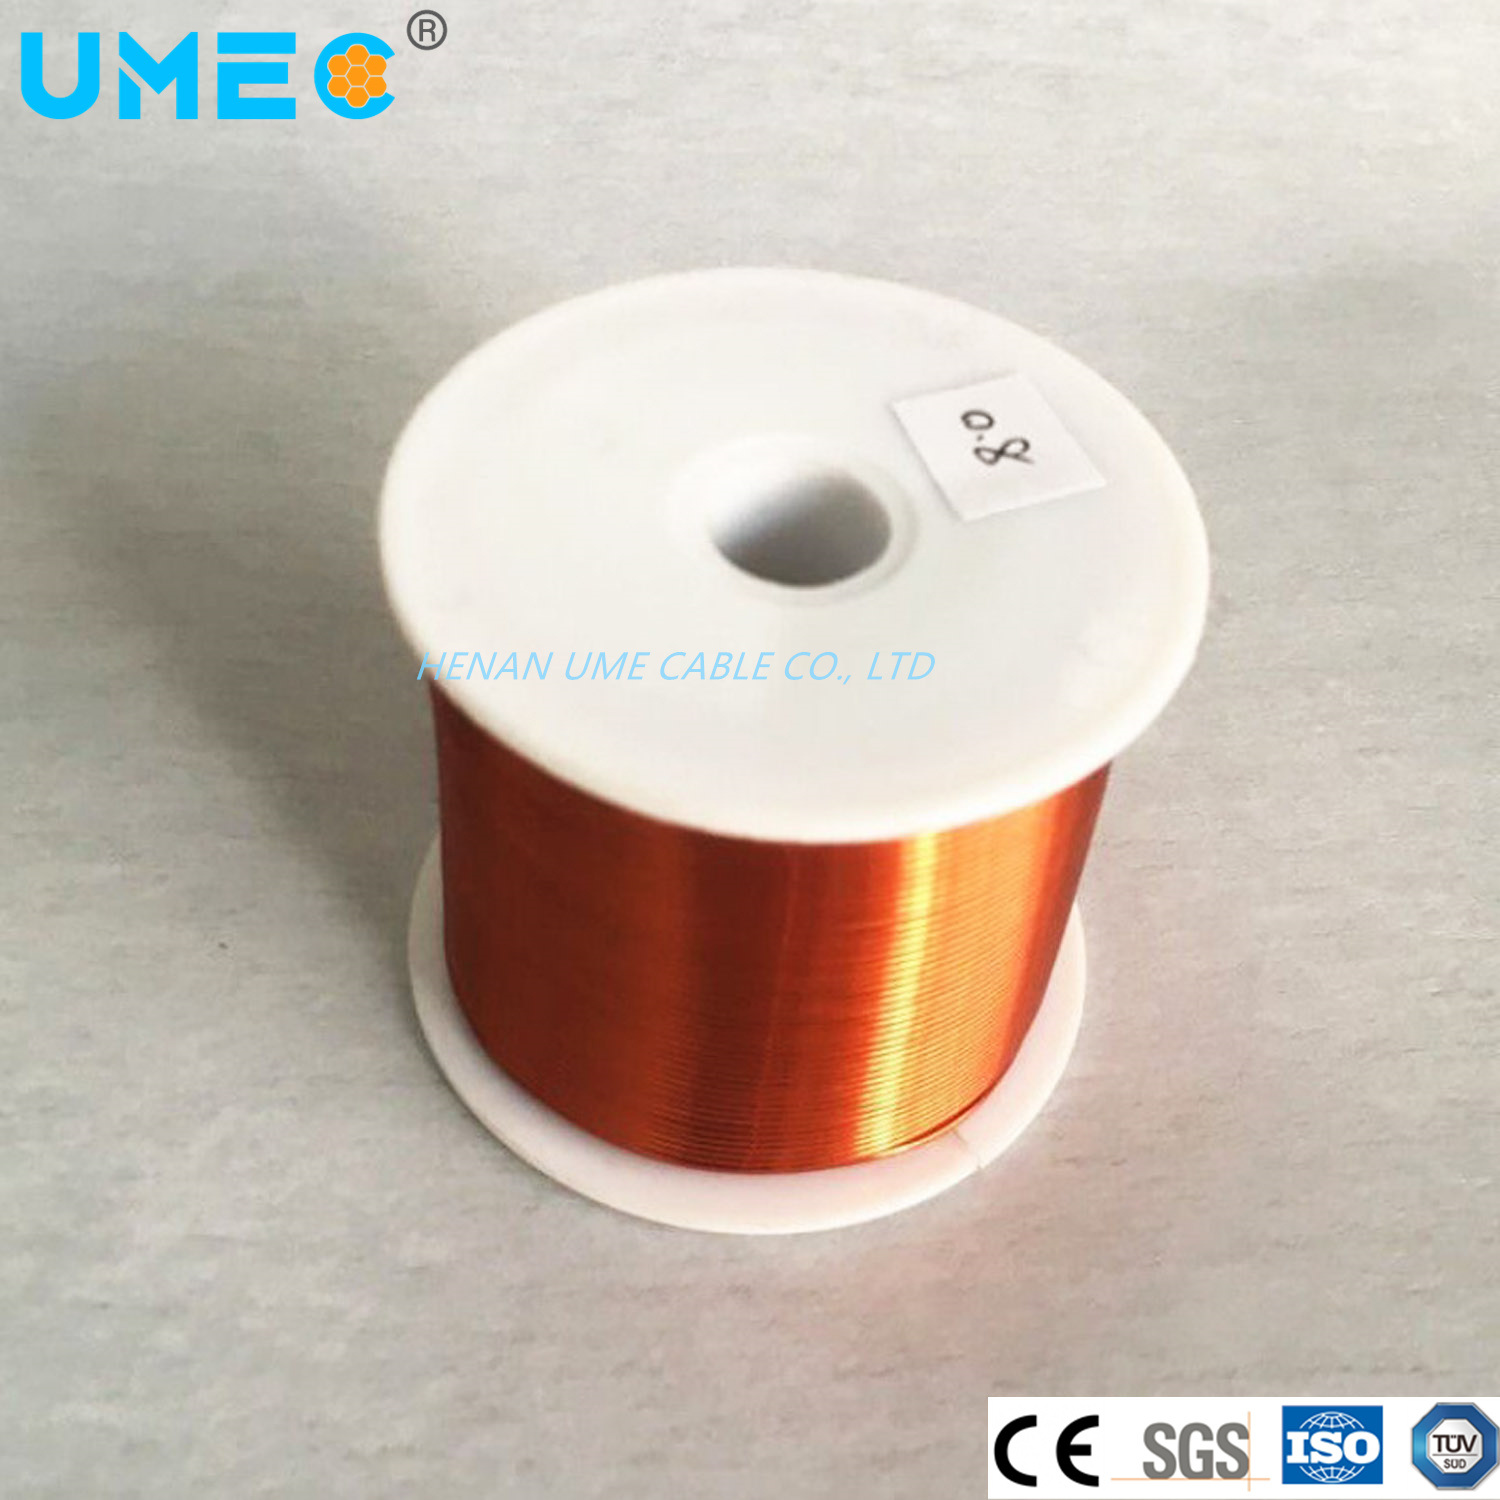 Electric Copper Clad Aluminum Enameled Wire Is Suitable for Electronic Transformers Wires and Cables Inductance Motors Cable Wire